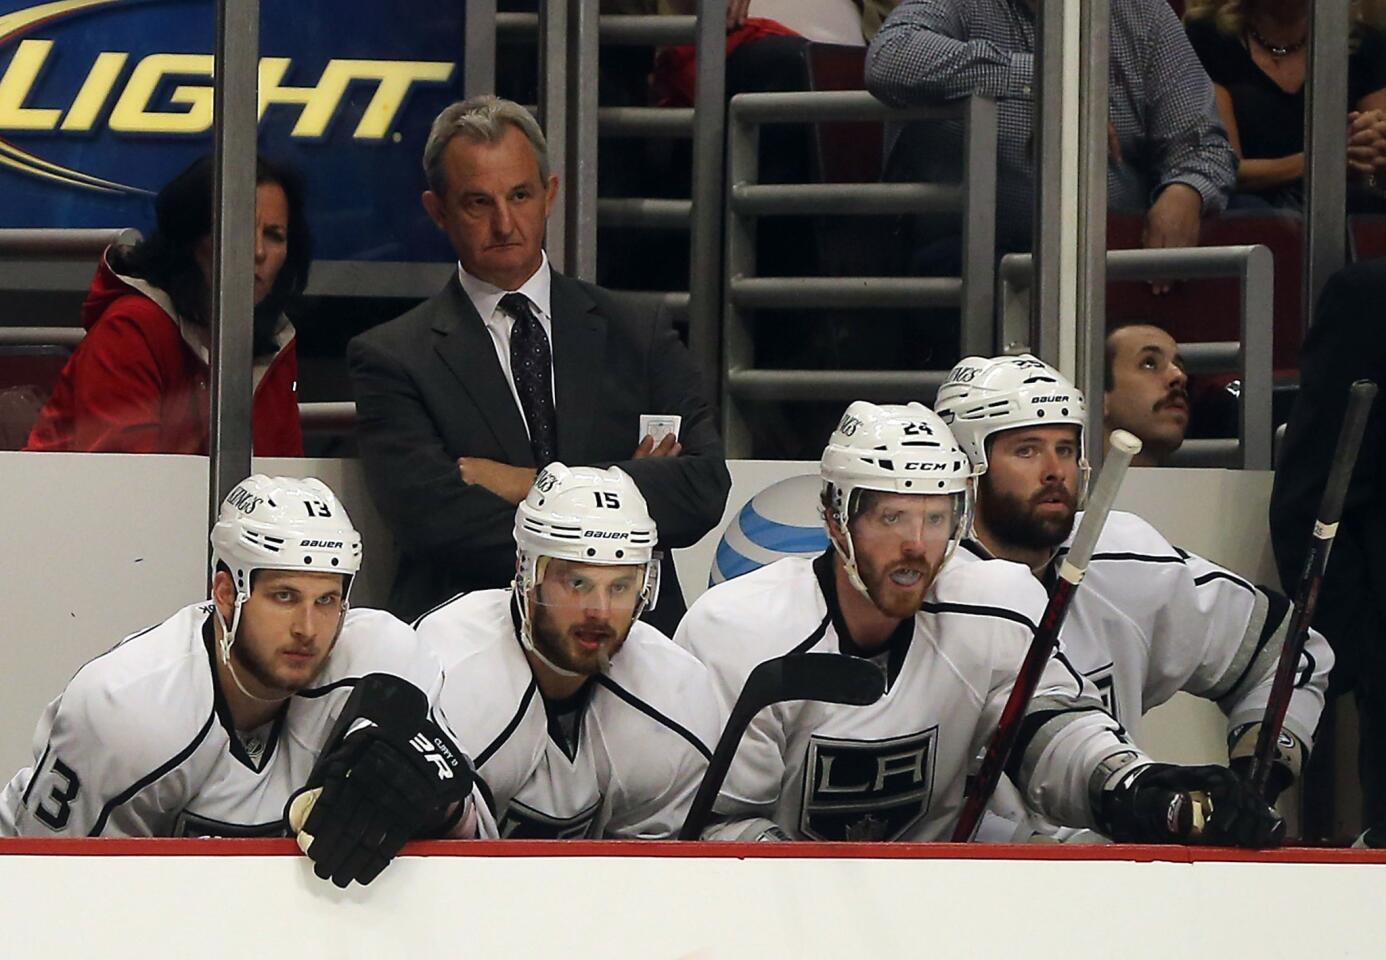 Coach Darryl Sutter and Kings players watch play in the third period of a 2-1 loss to the Blackhawks in Game 1 of the Western Conference finals on Saturday at United Center in Chicago.